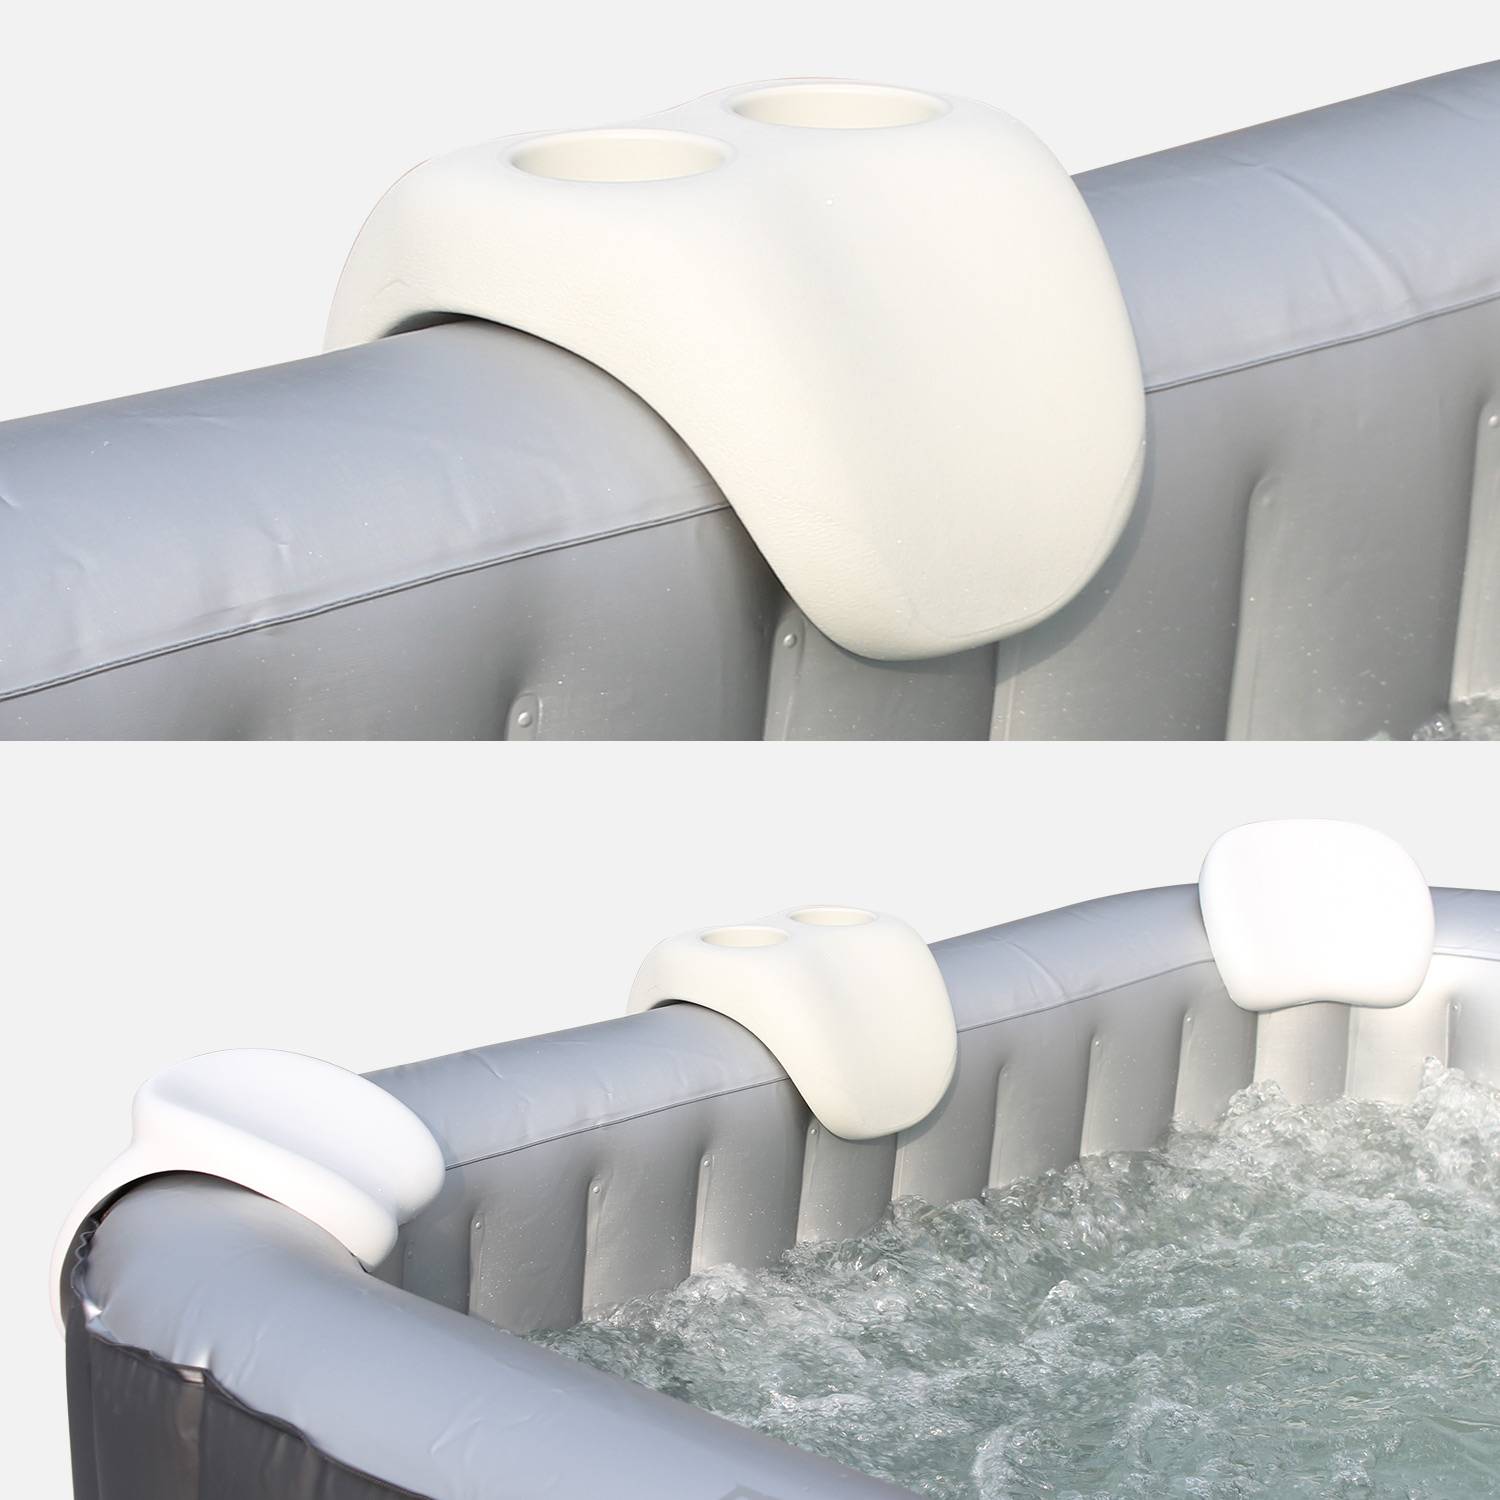 Pair of headrests and cupholder for inflatable spa - MSpa,sweeek,Photo5